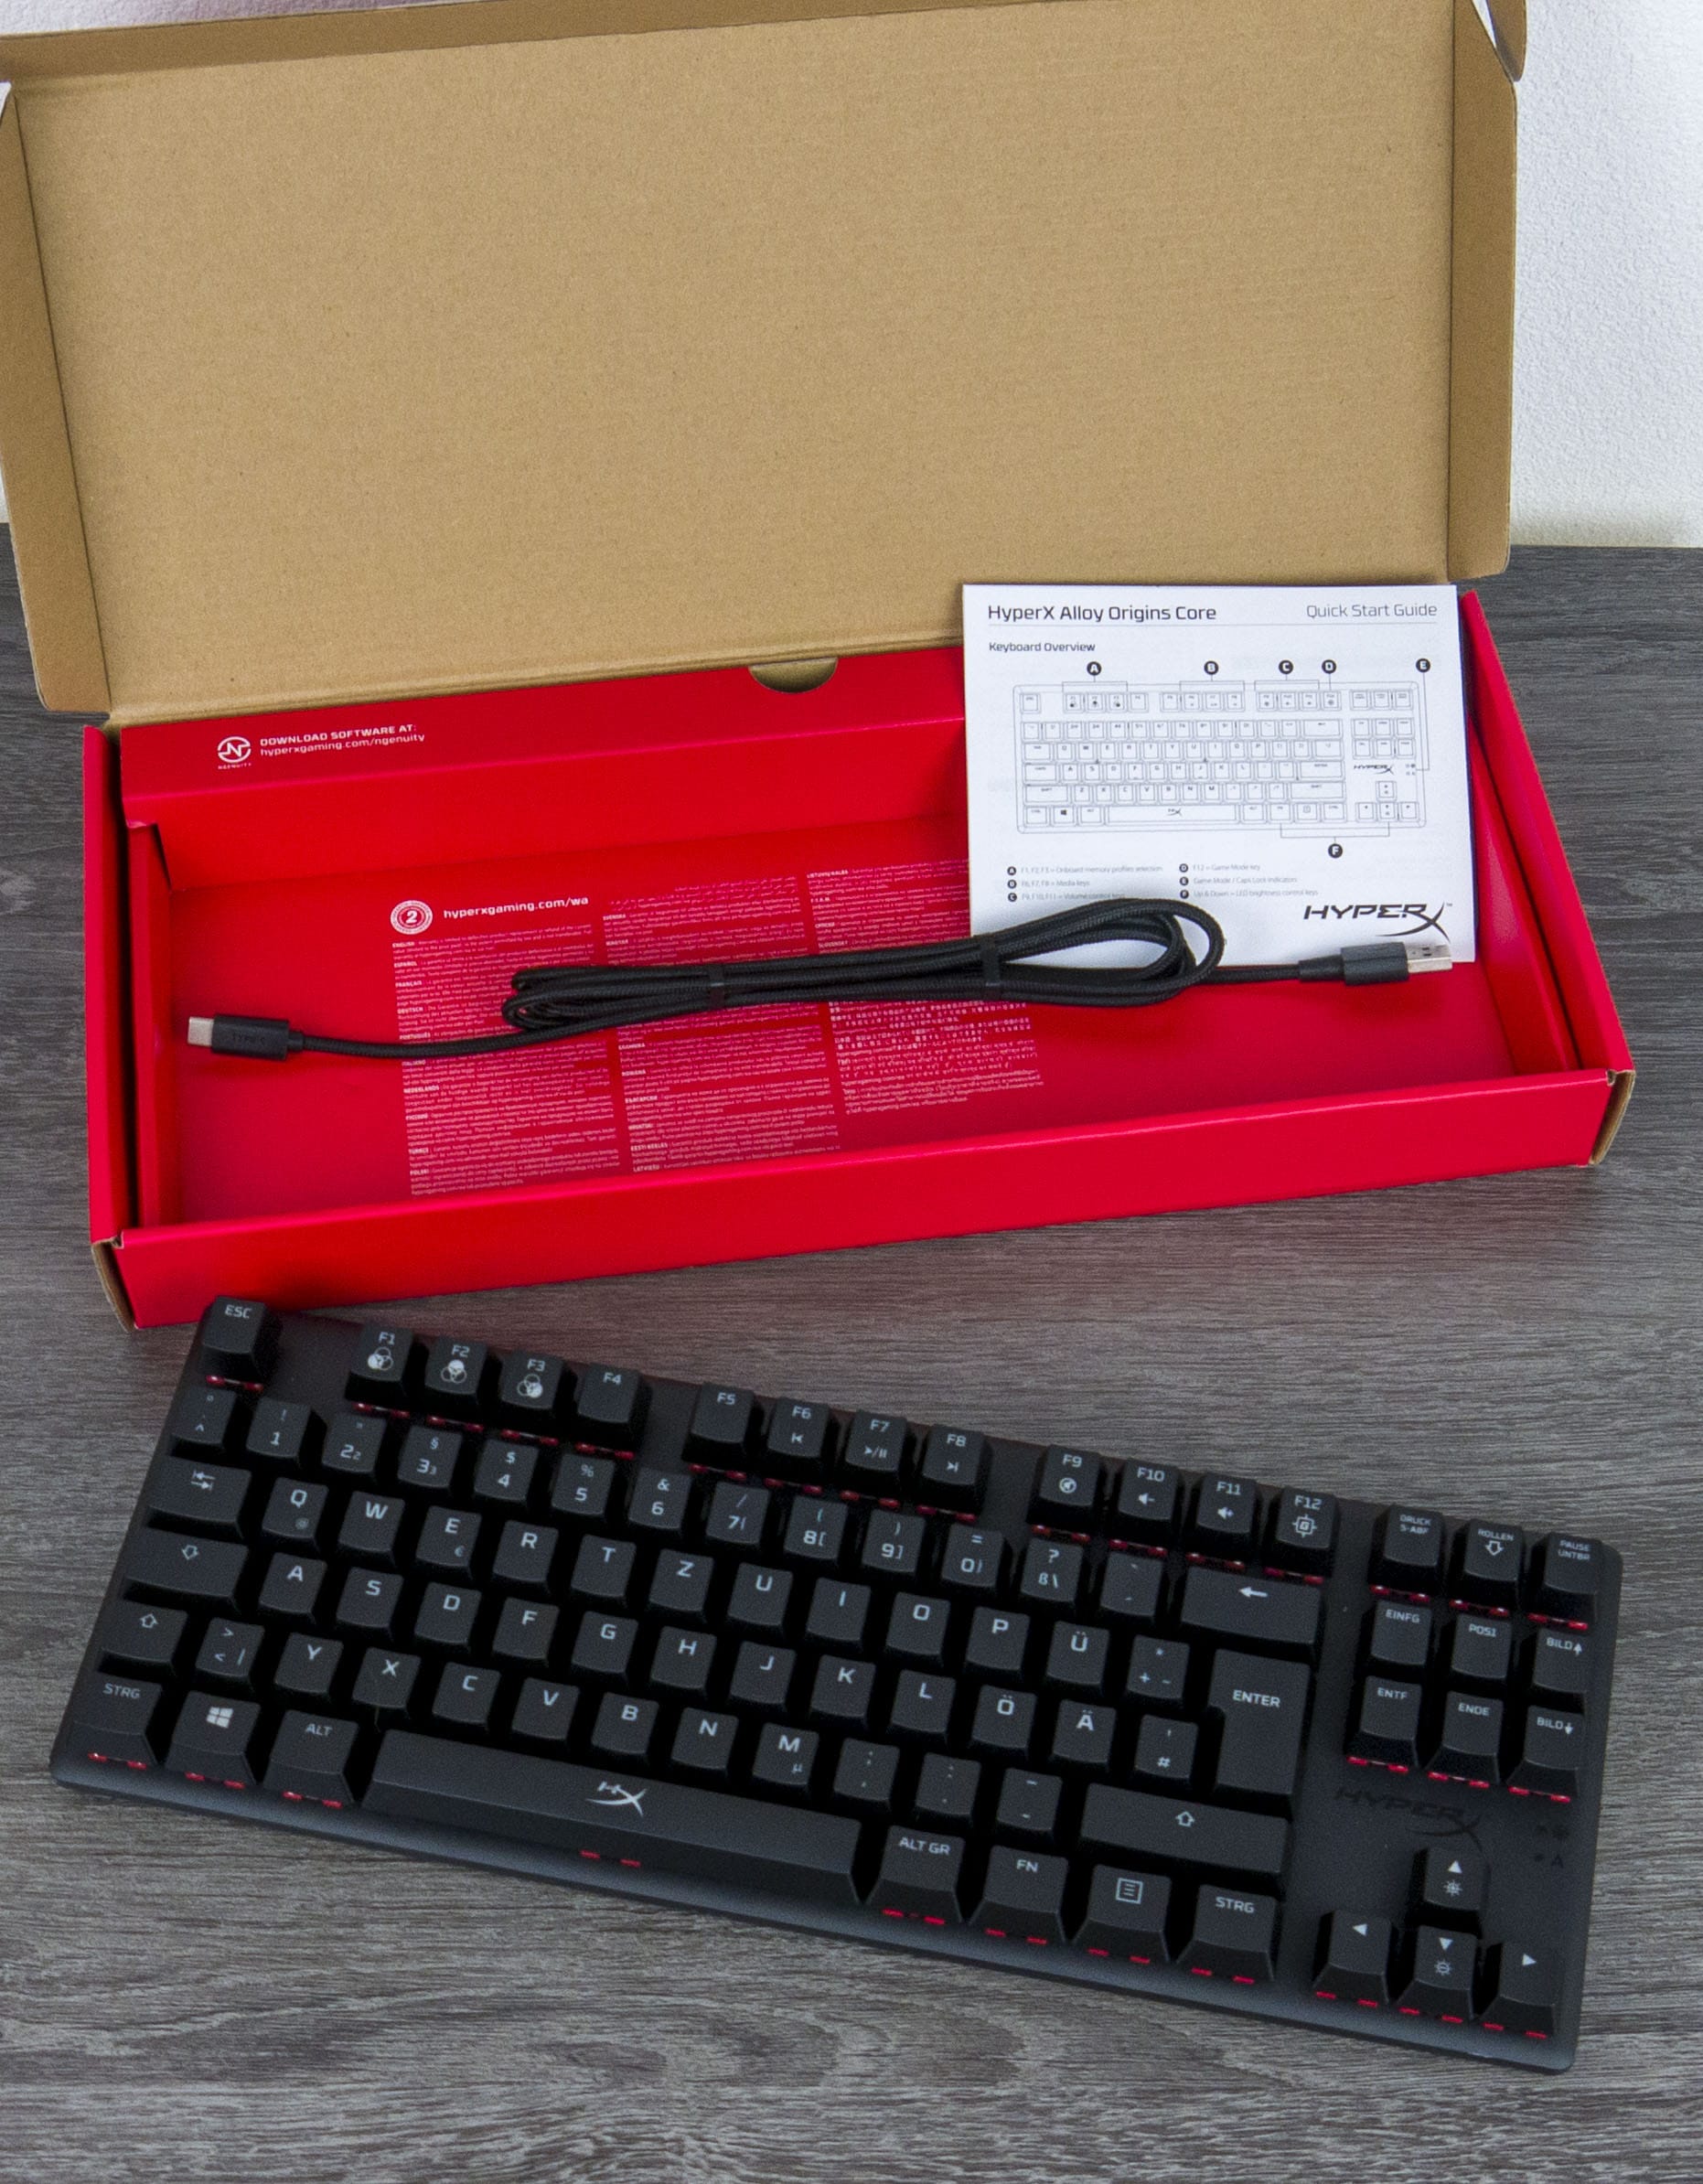 In test: This time also in German, HyperX Alloy Origin Core gaming keyboard